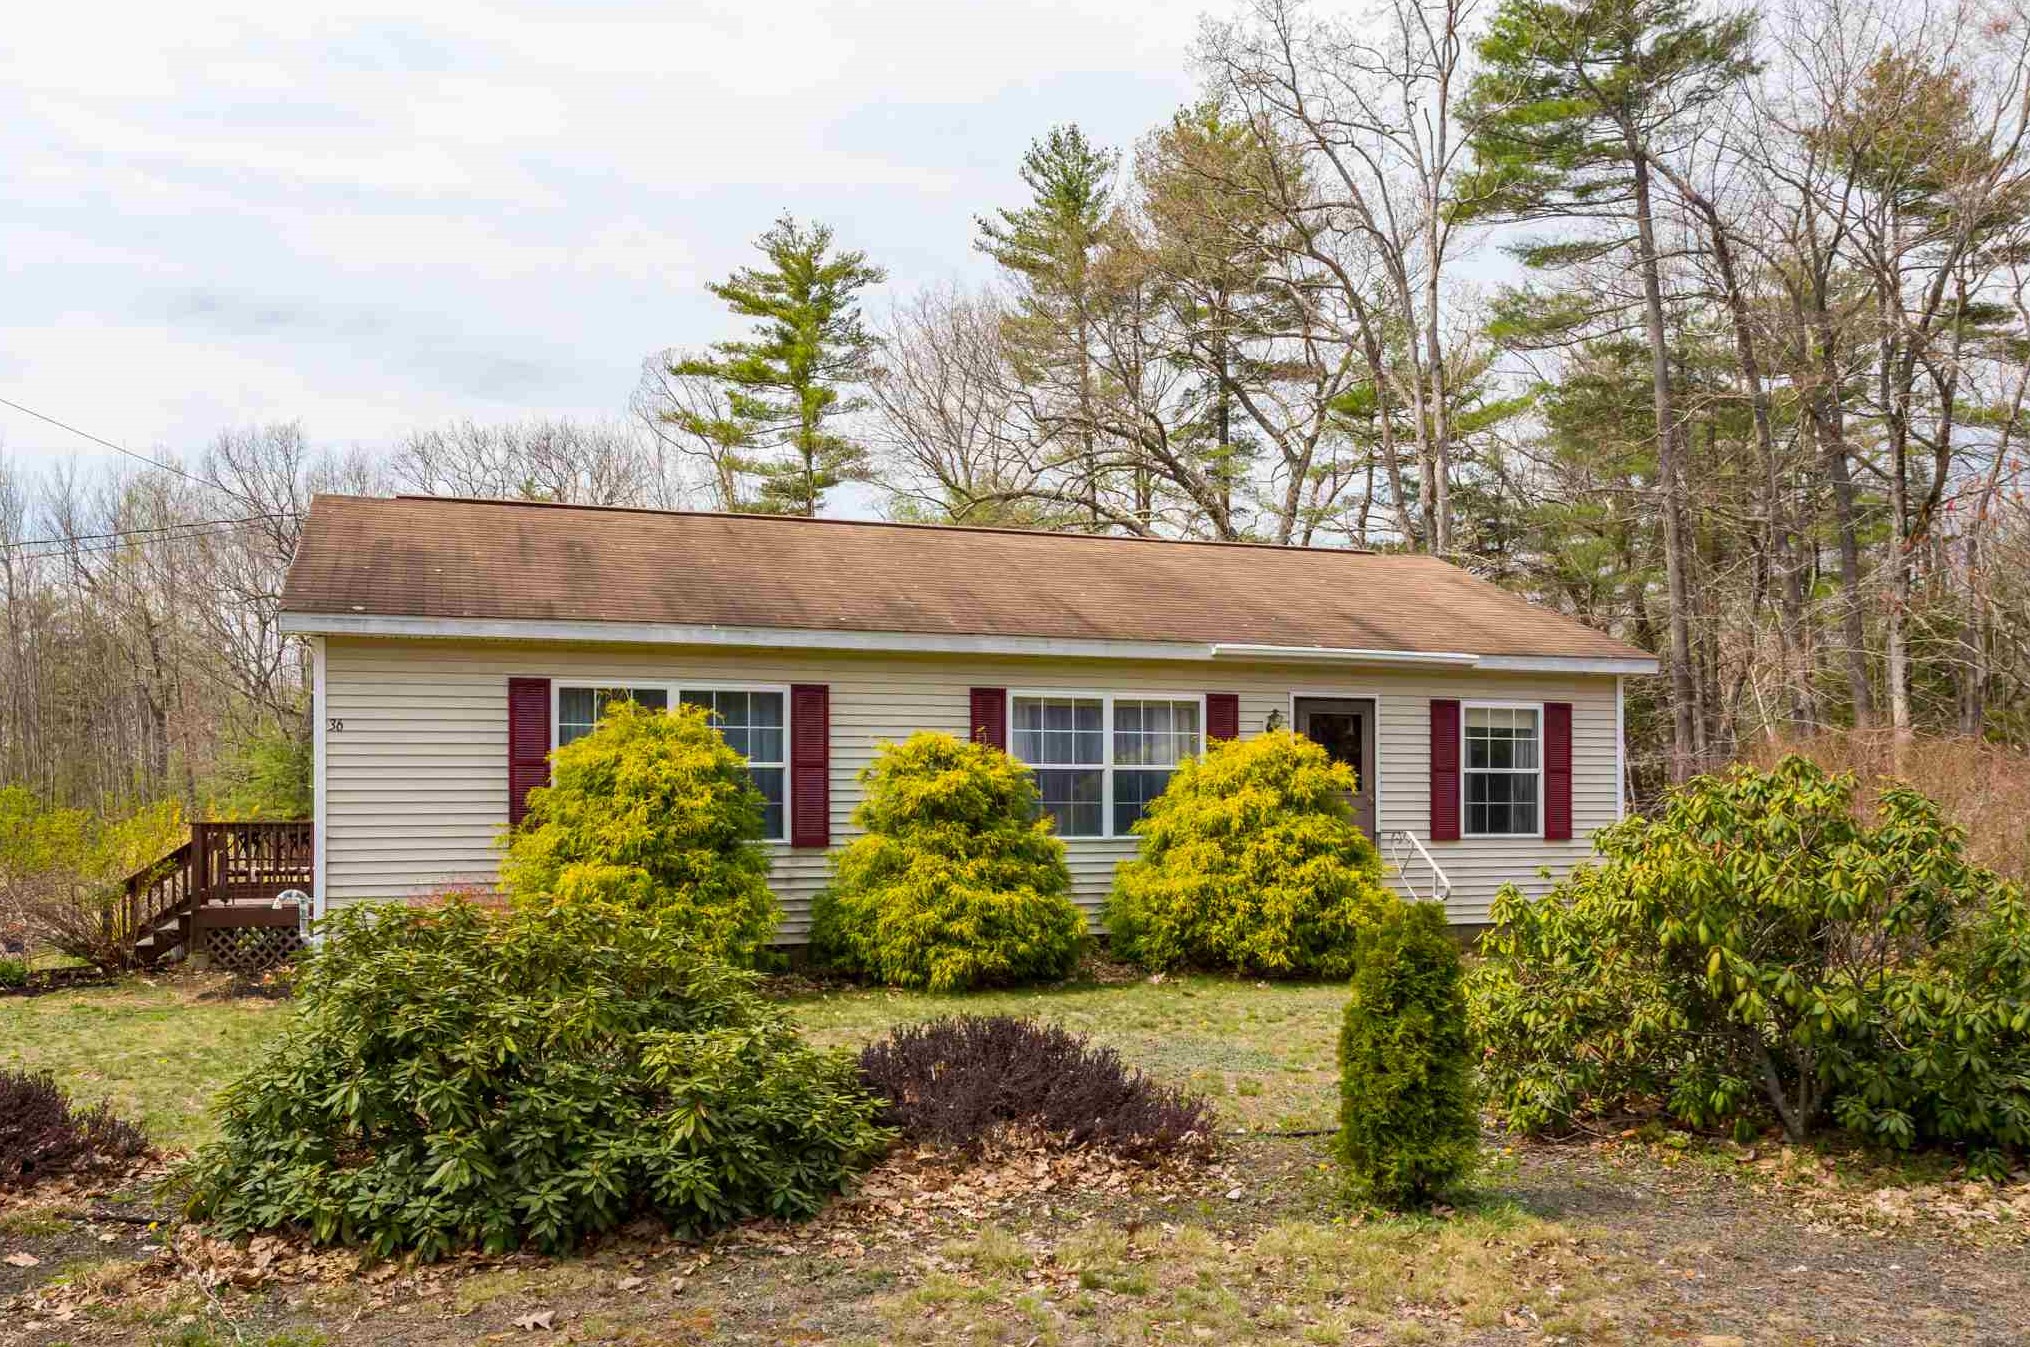 36 Jenness Rd, Epping, NH 03042-2102